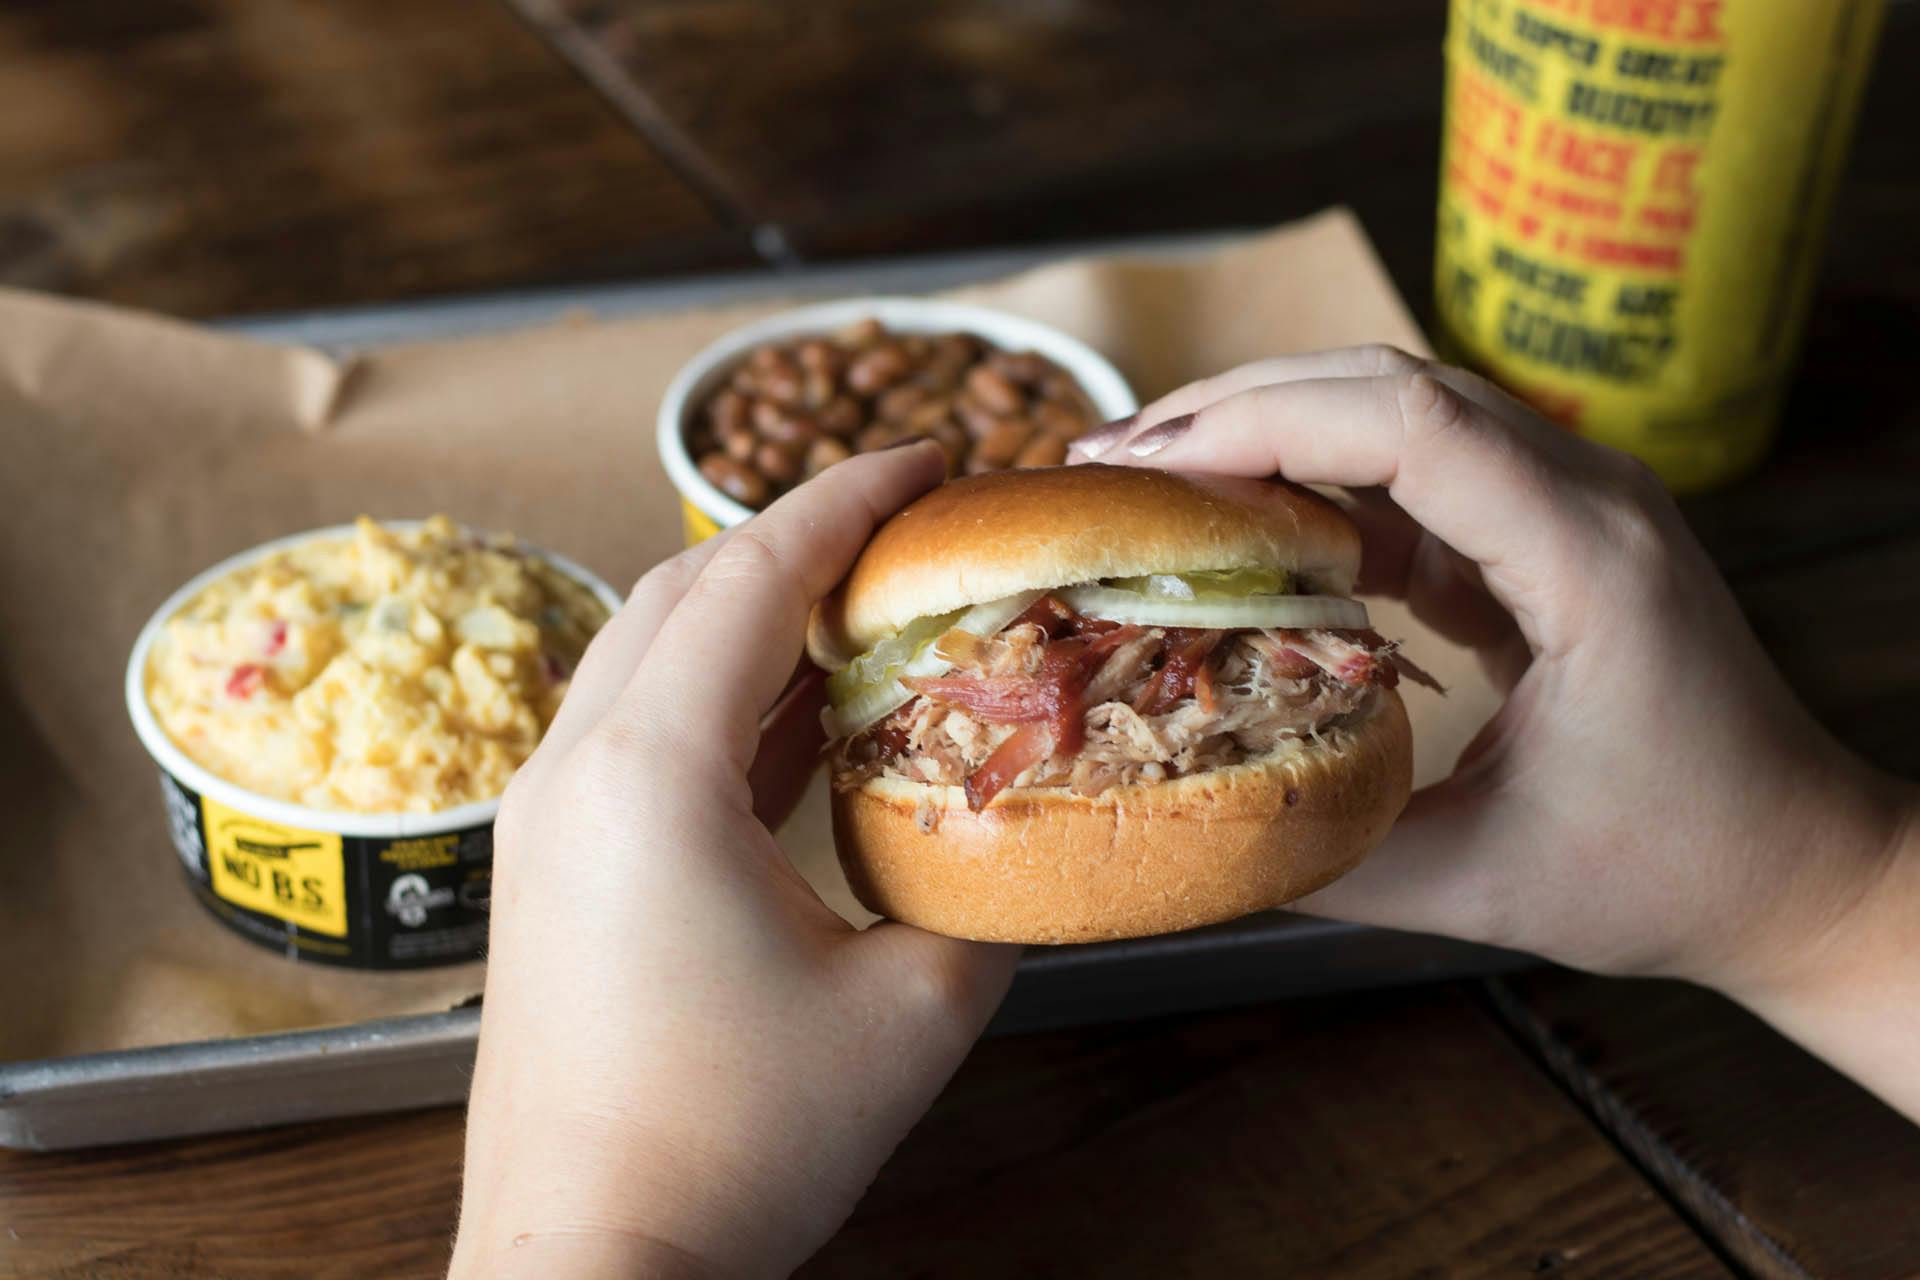 Manteca Residents Get a Tasty New Option with Dickey’s Barbecue Pit